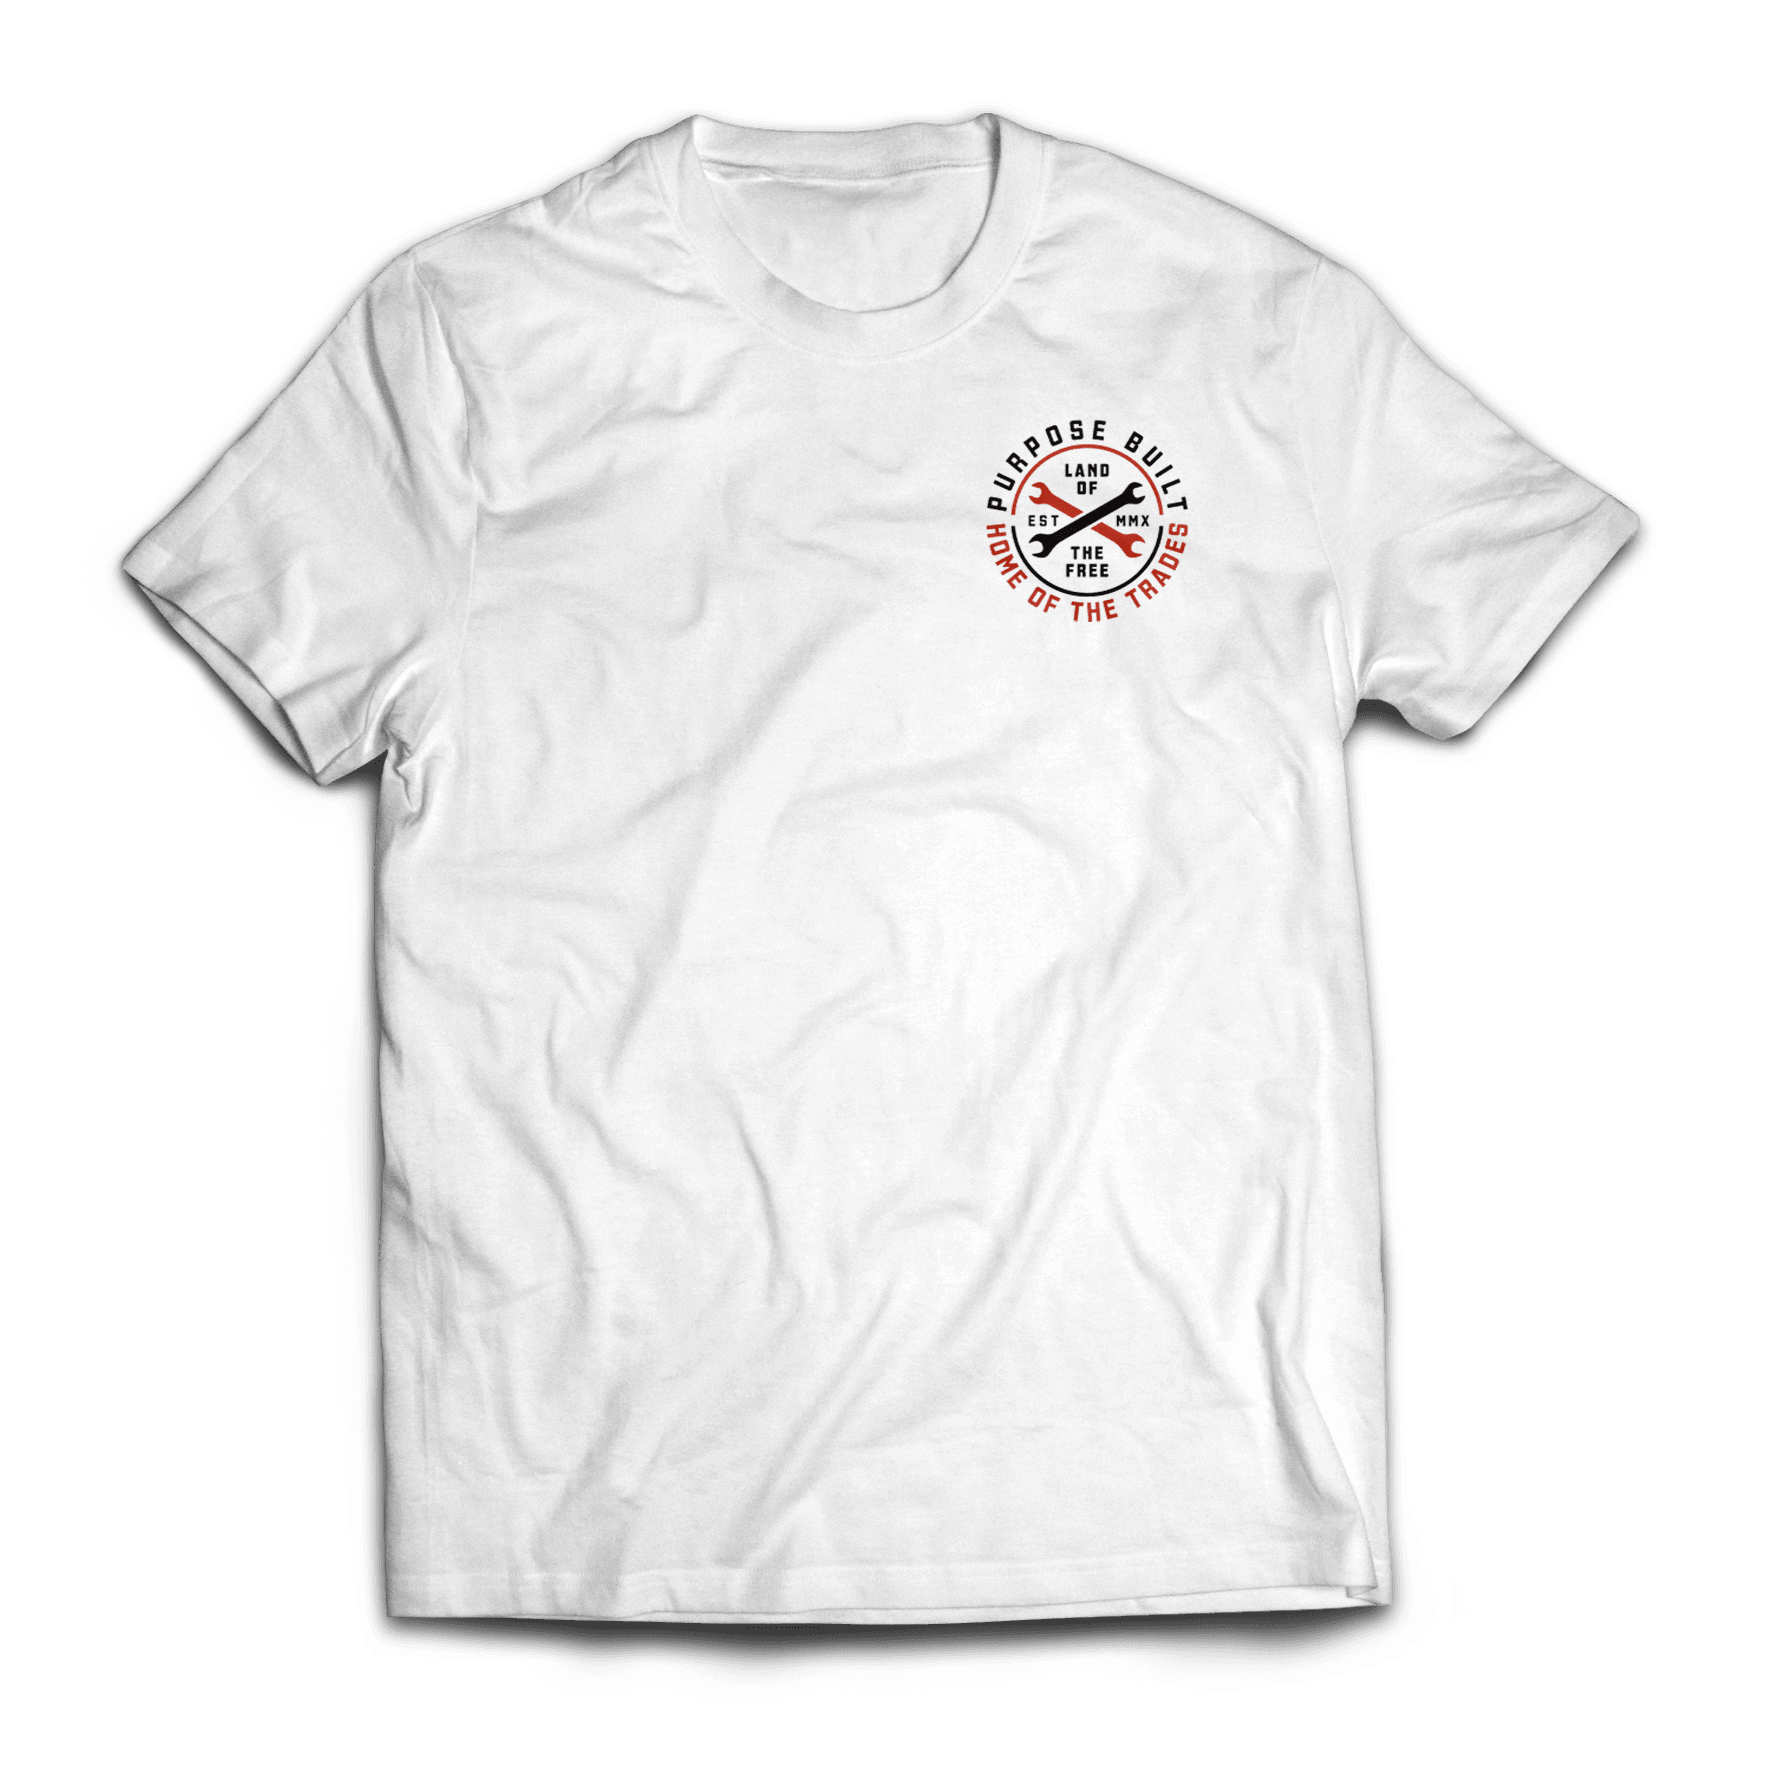 Hot Wrenches Tee, White - Purpose-Built / Home of the Trades